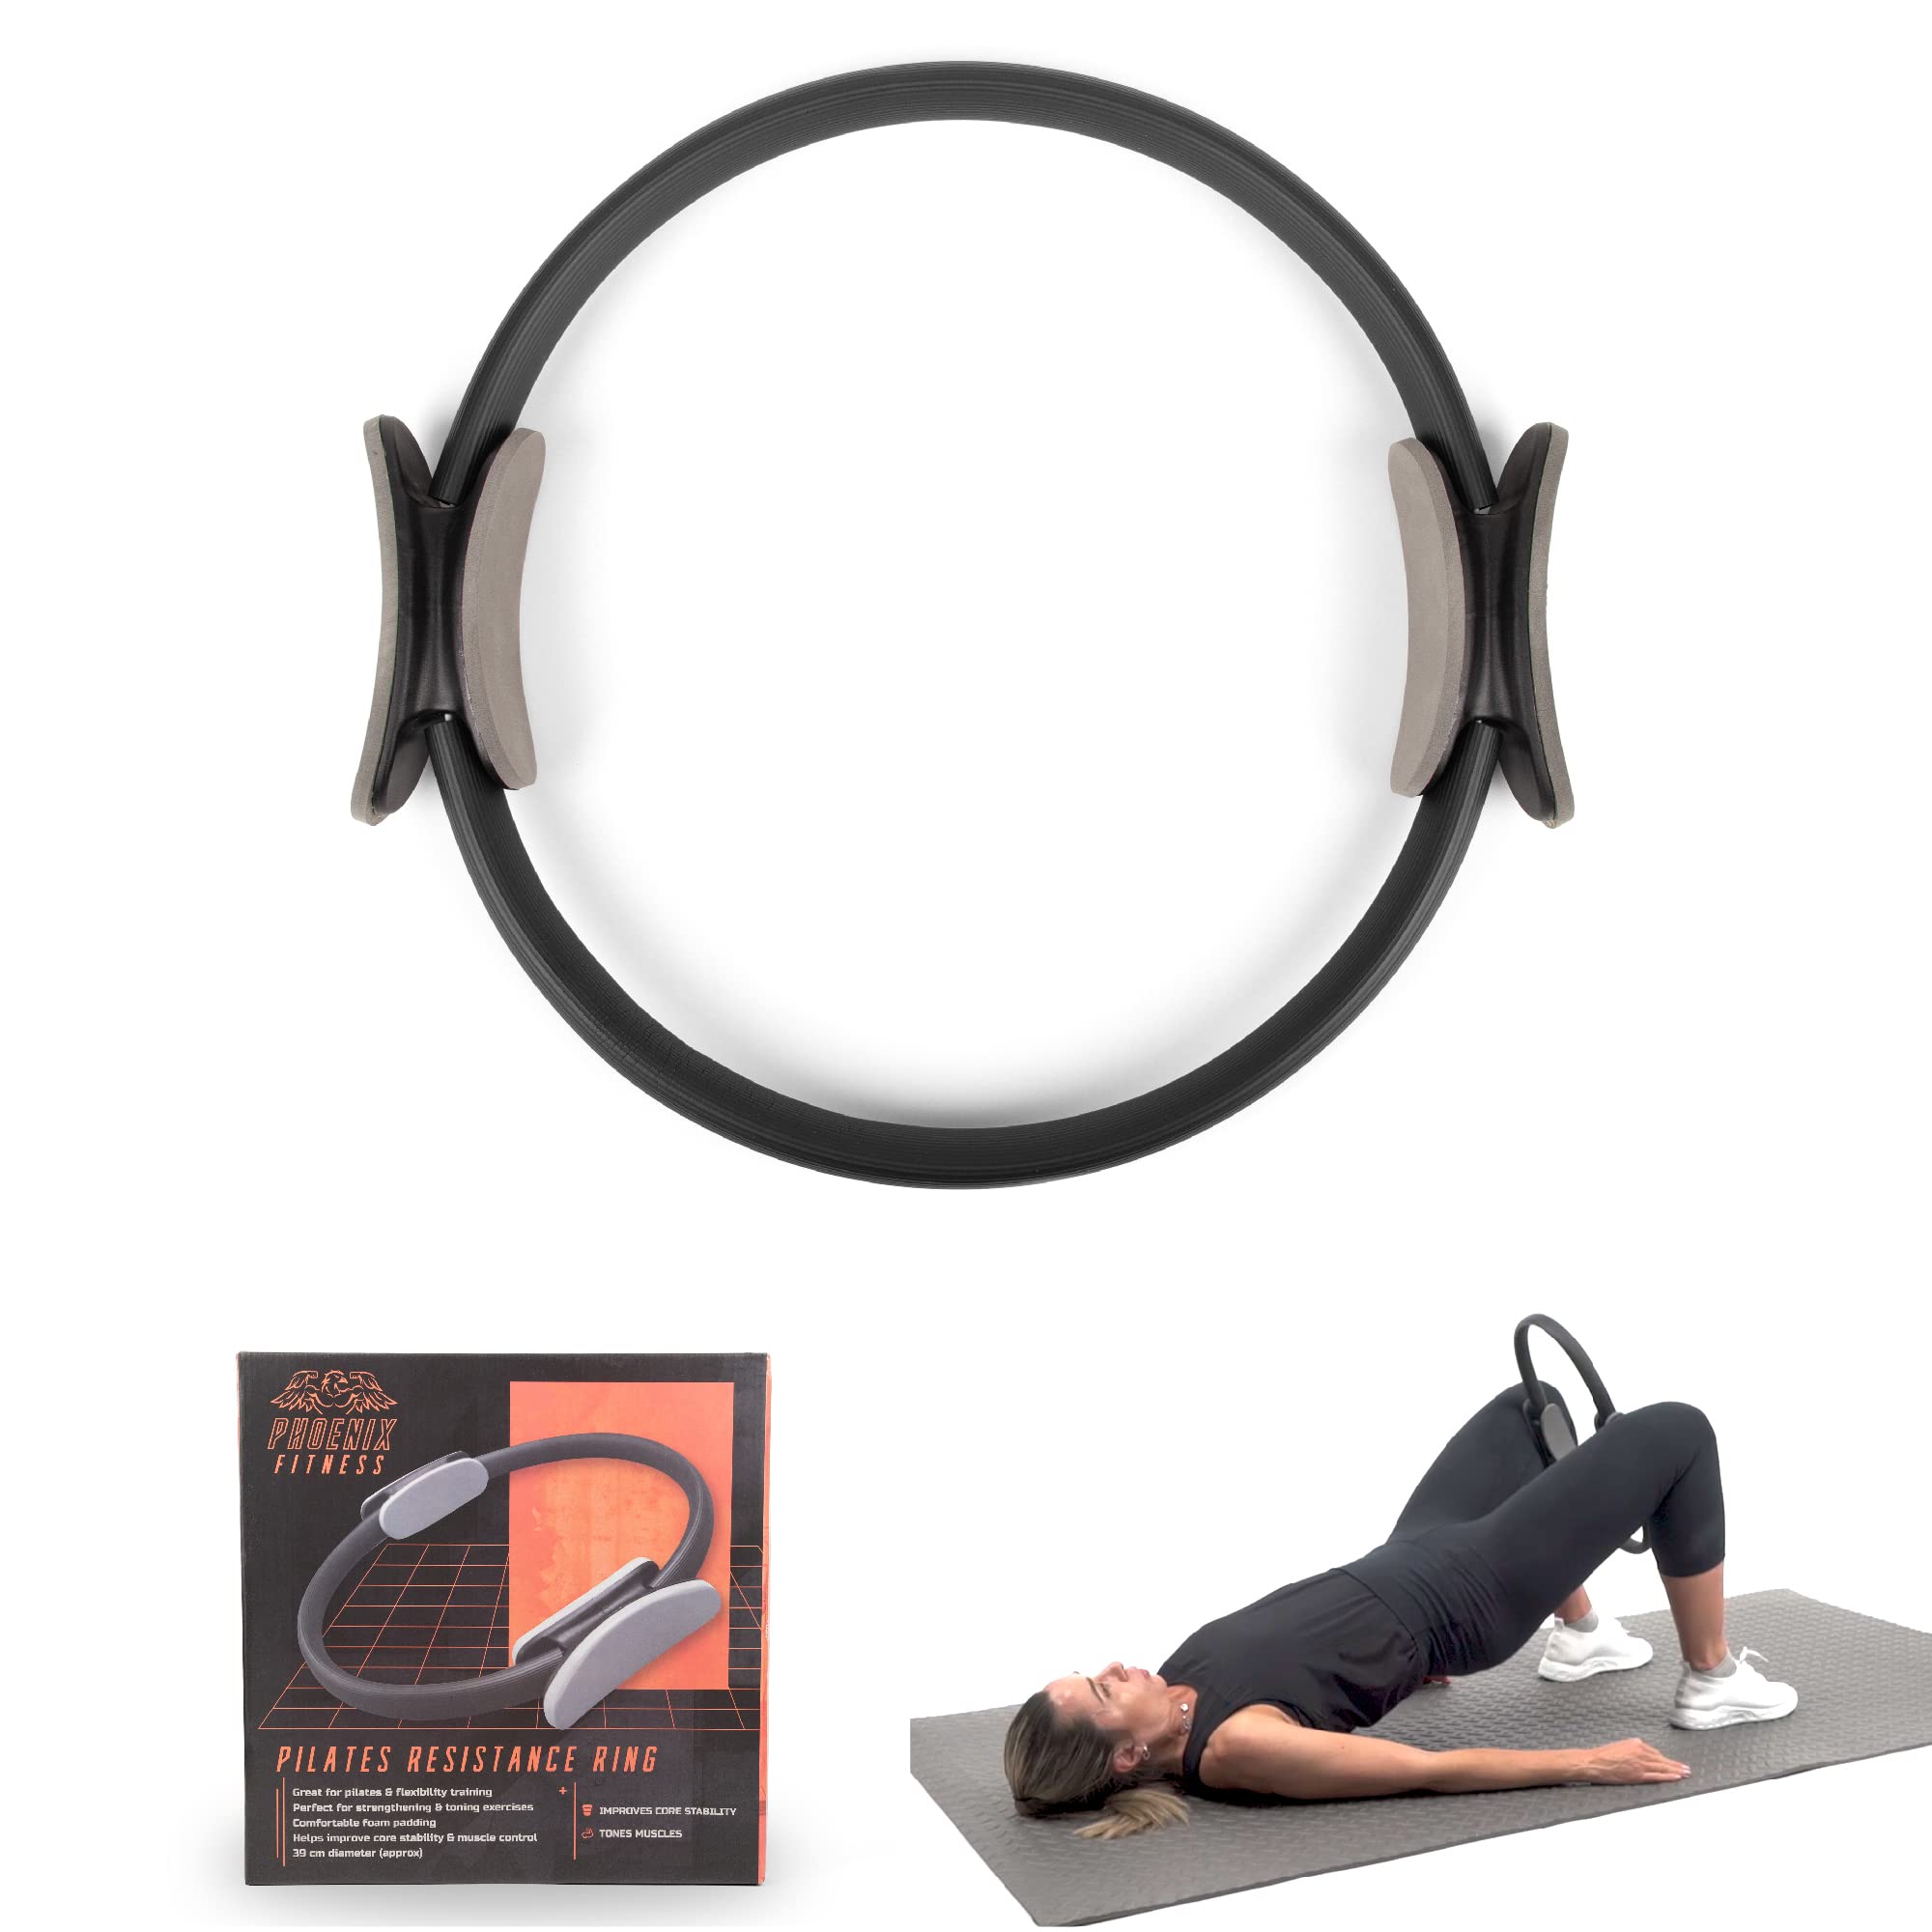 Phoenix Fitness RY1009 Pilates Ring Double Handle Exercise Circle Fitness Magic Circle Resistance Ring Dual Grip for Yoga Core Training 15 Inch, Black